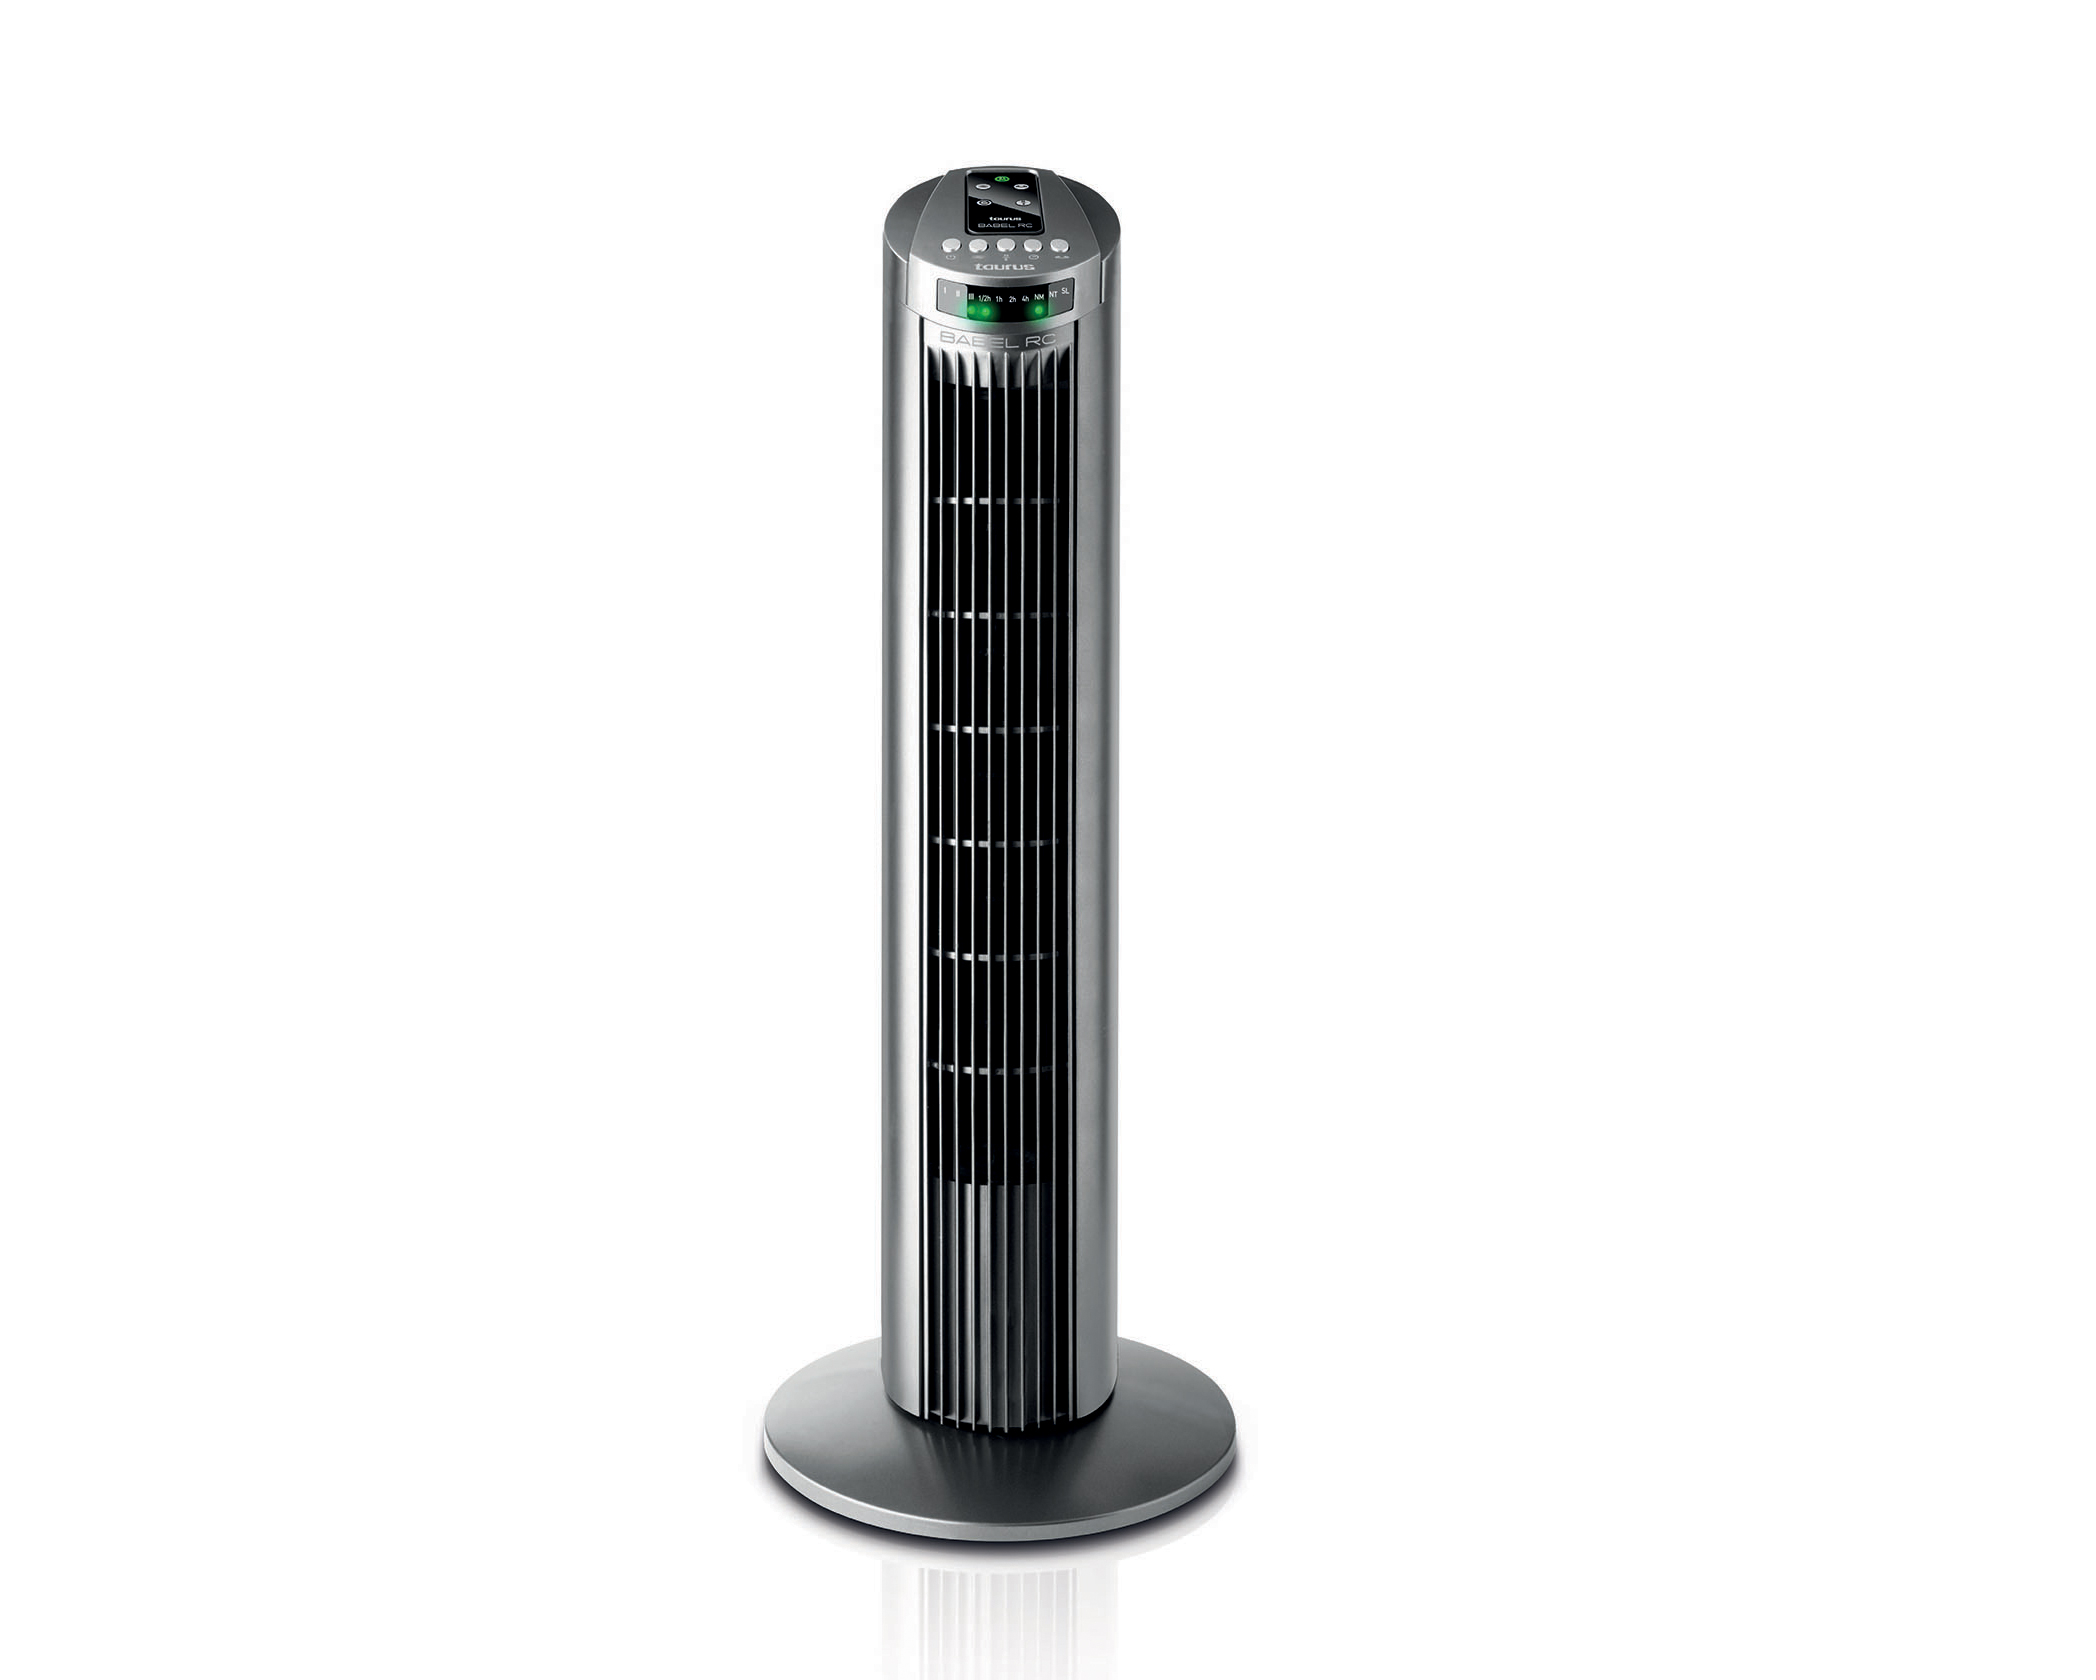 Ventilador Torre Turbo Tower Fan intended for proportions 2096 X 1680